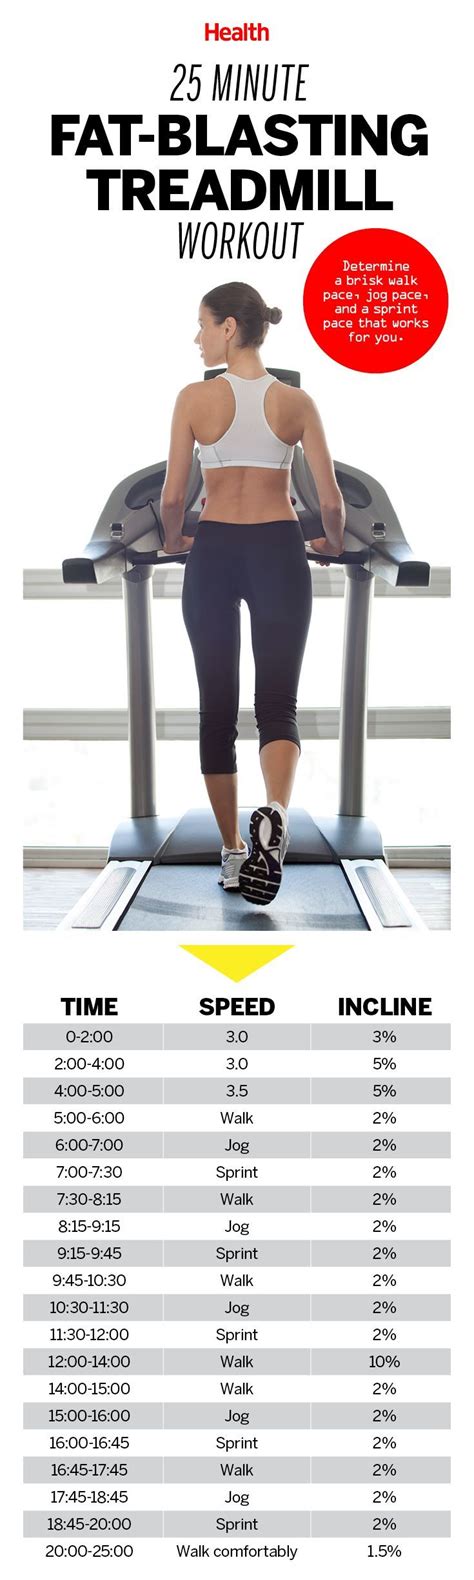 40 Best Ideas About Treadmill And Elliptical Workouts On Pinterest